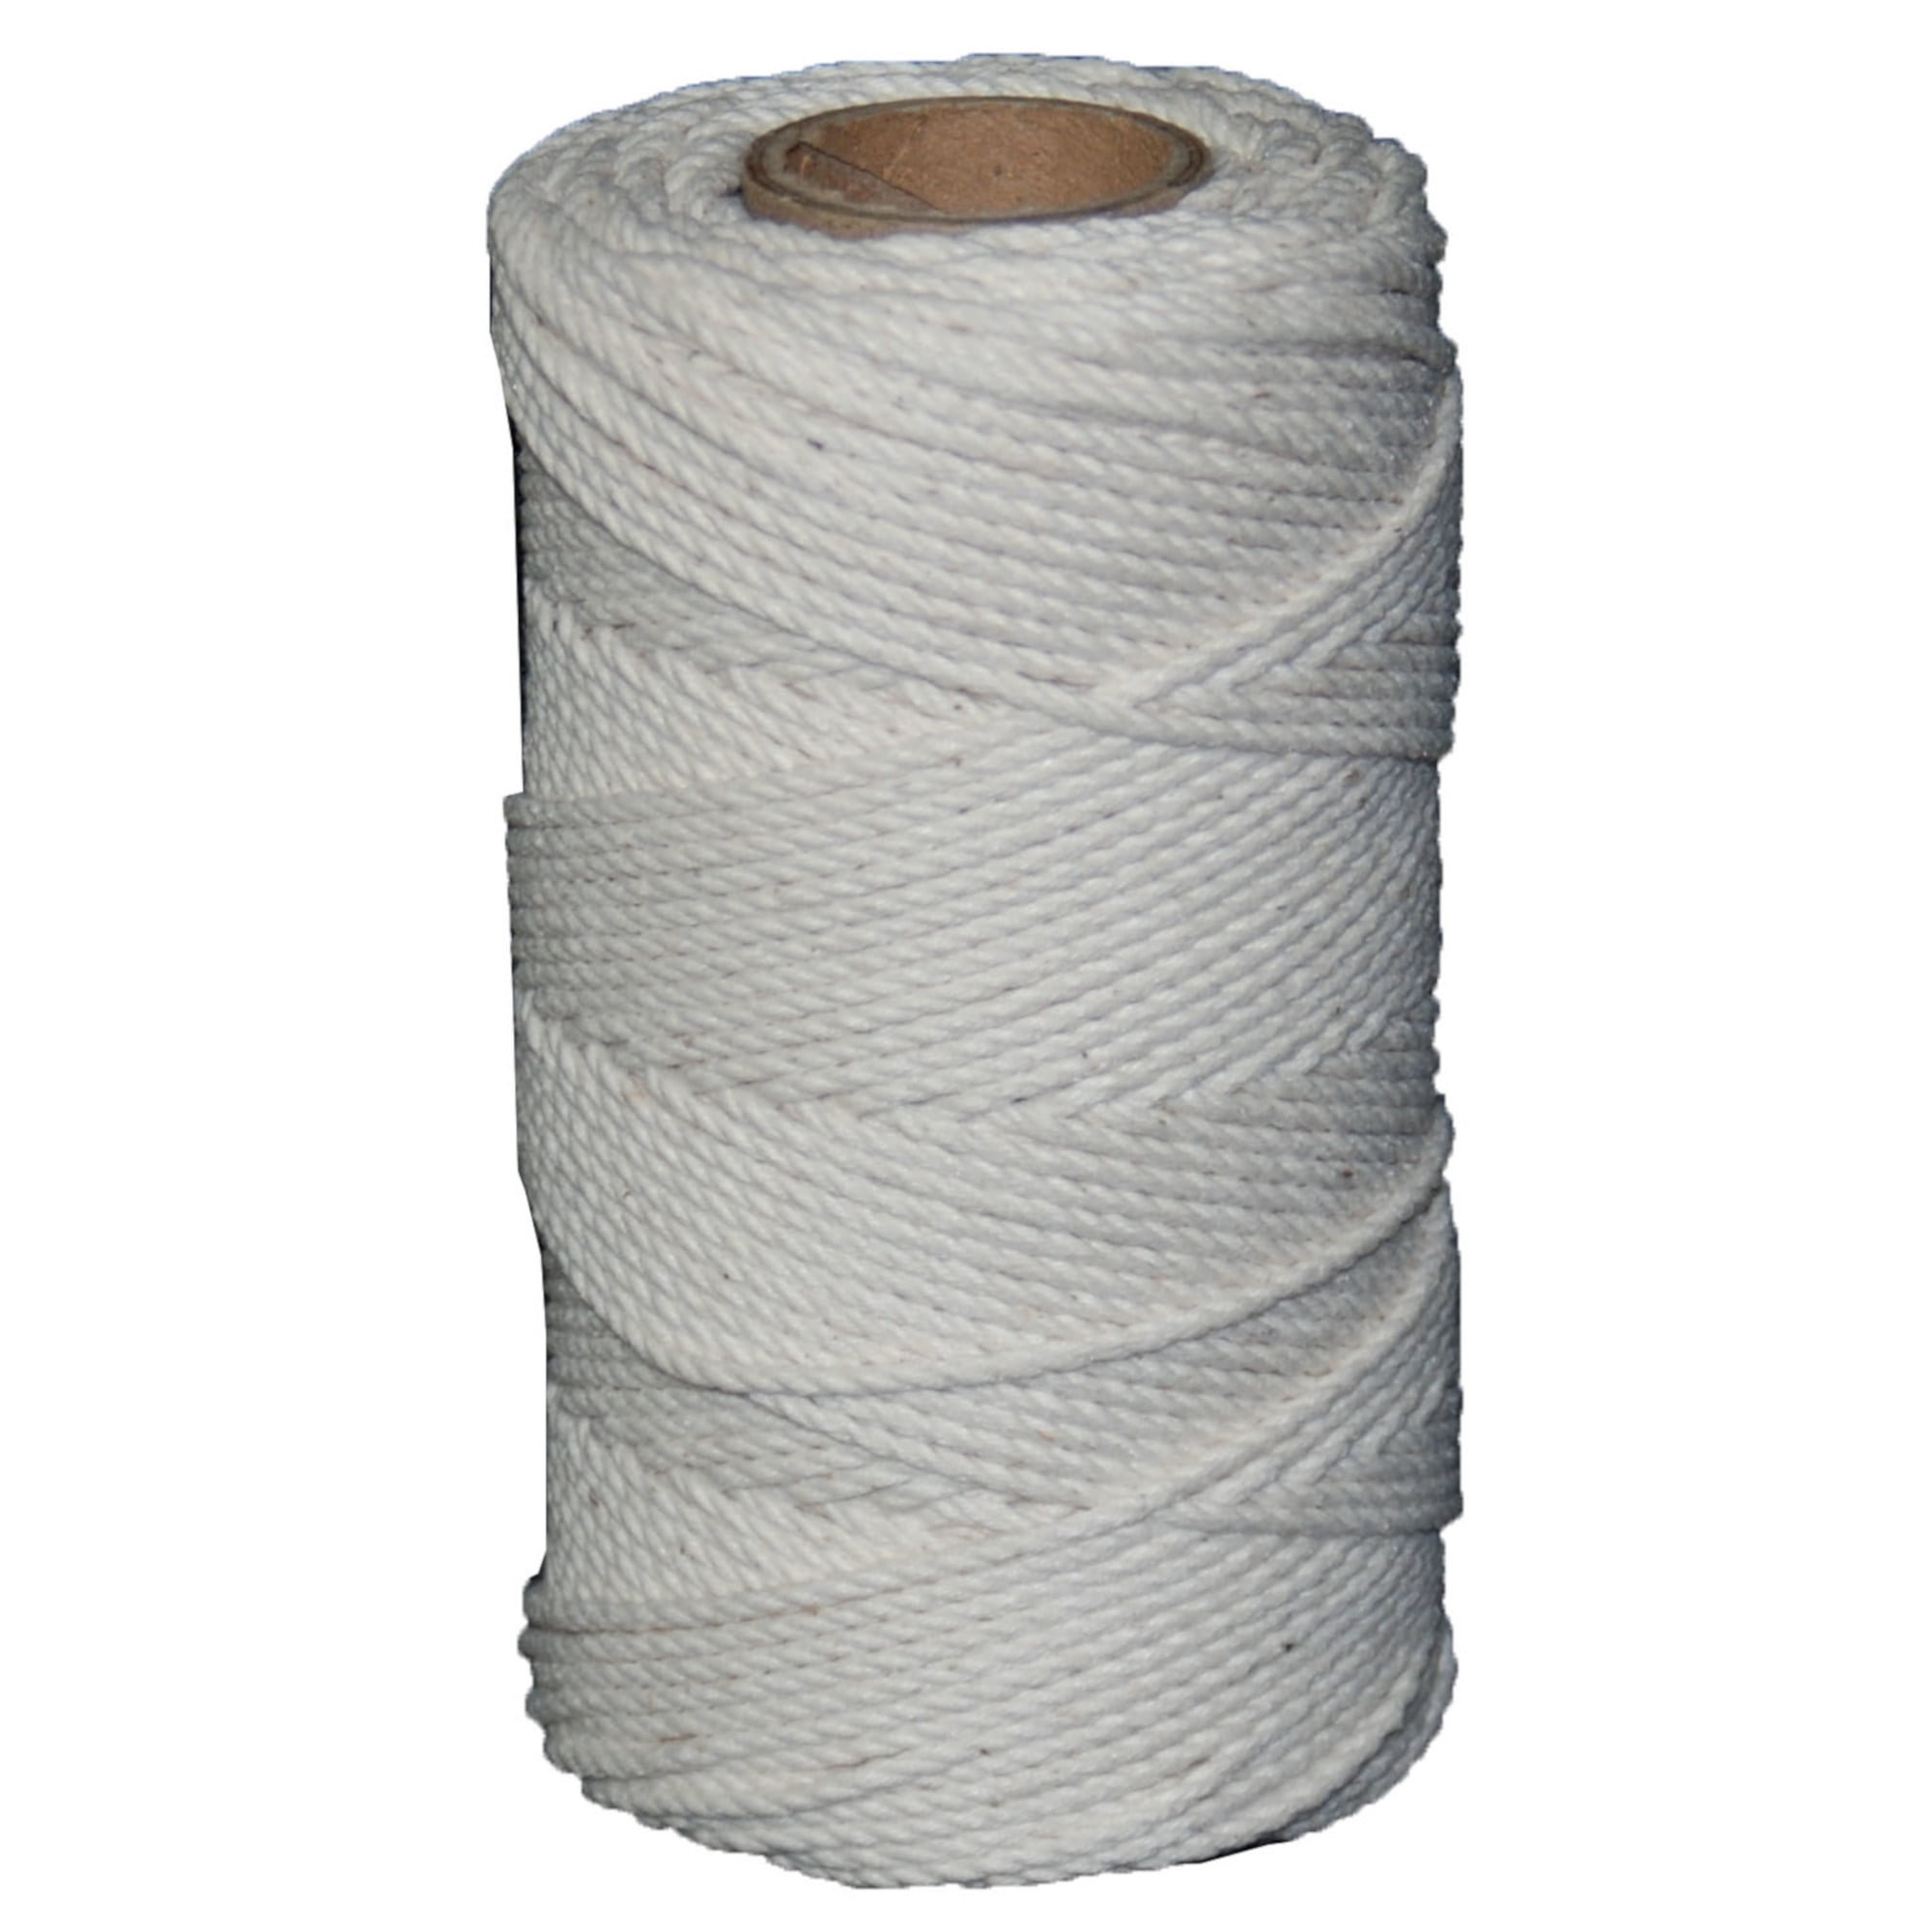 Cora's Cotton Natural Craft Cord, 2 mm, 100 ft in 2023